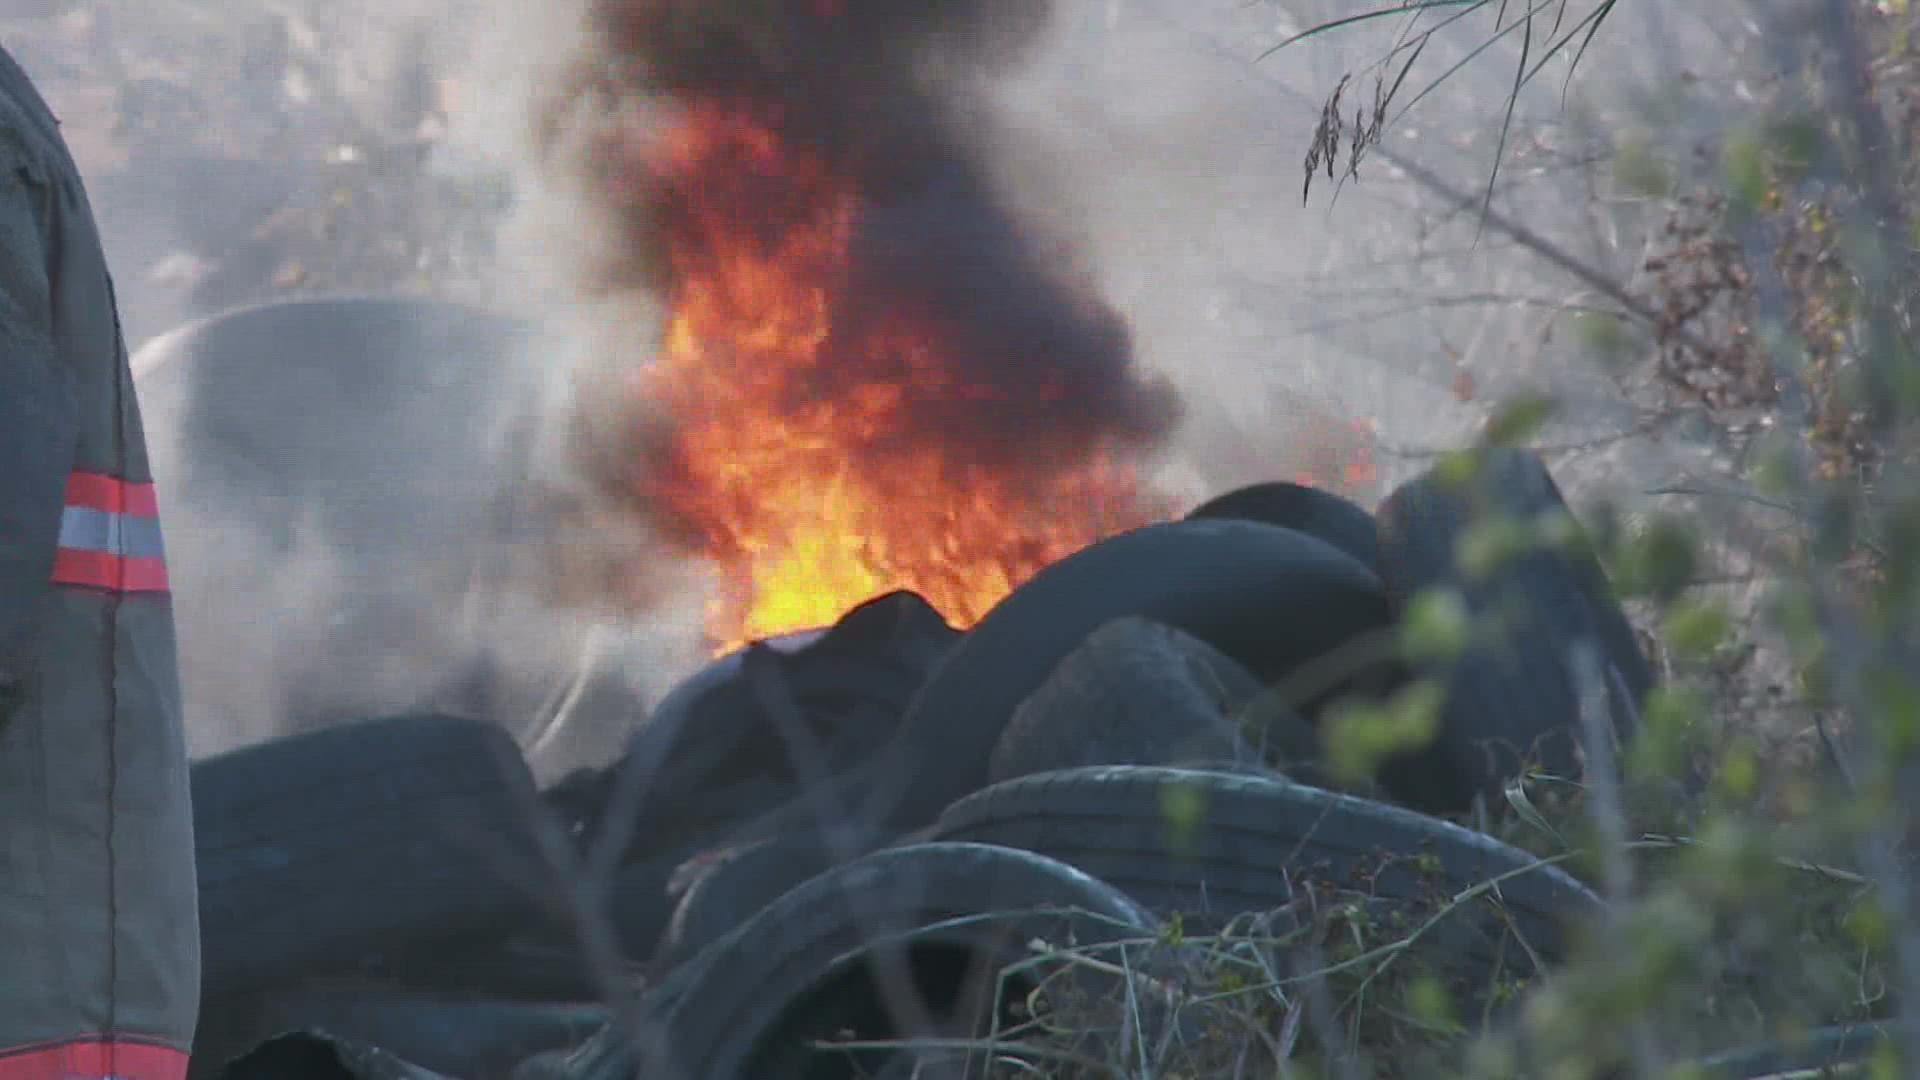 Illegally dumped tires are causing problems for firefighters.